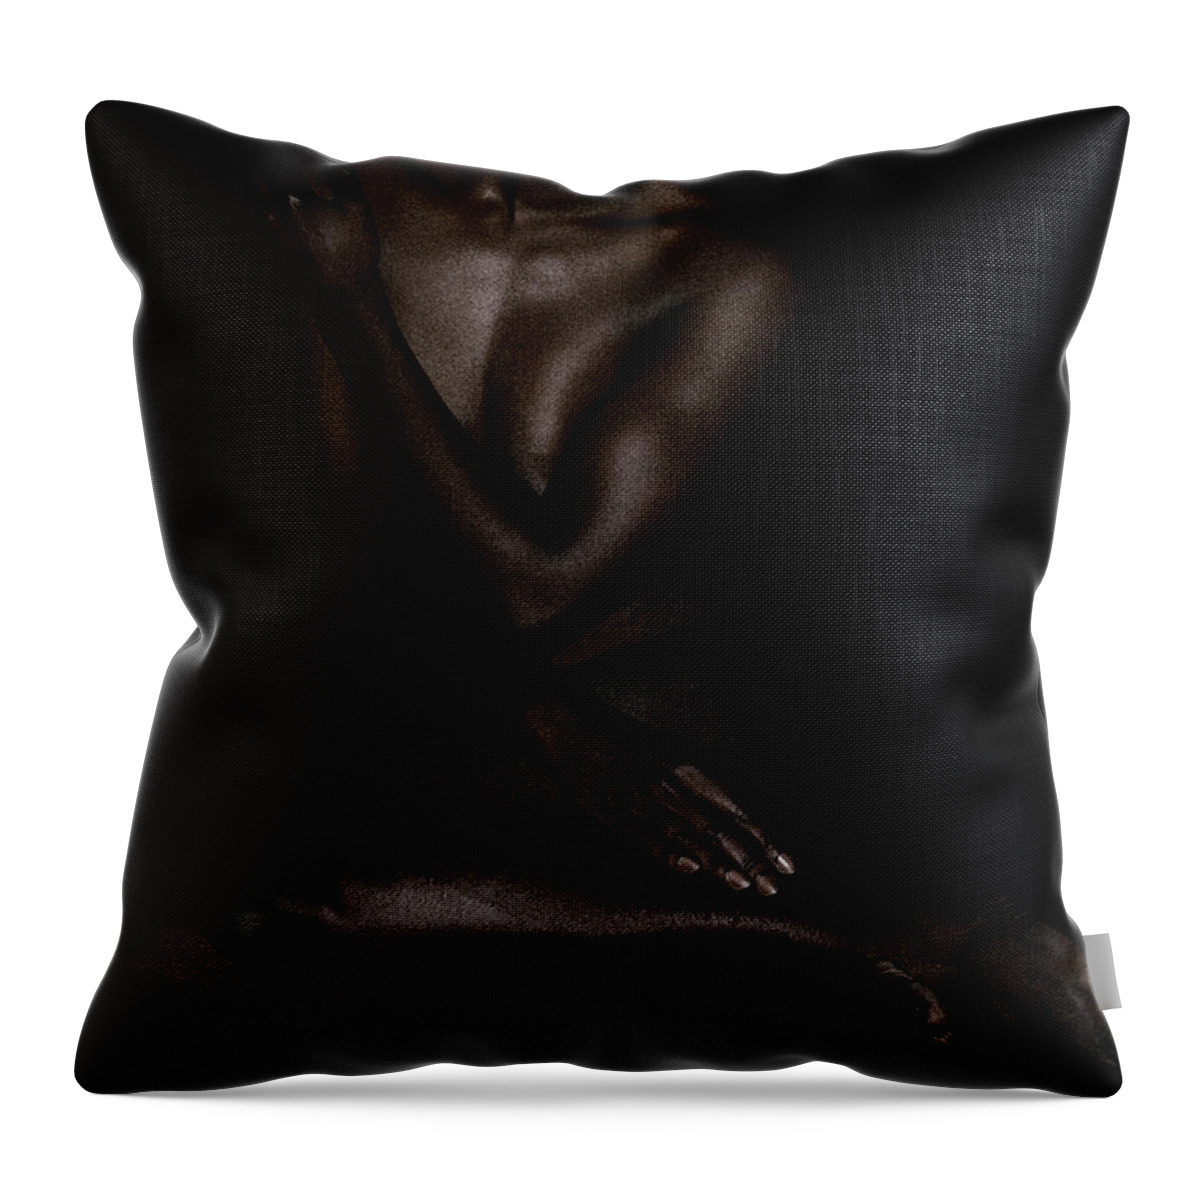 Seated Throw Pillow featuring the photograph Seated Woman 3 by David Kleinsasser